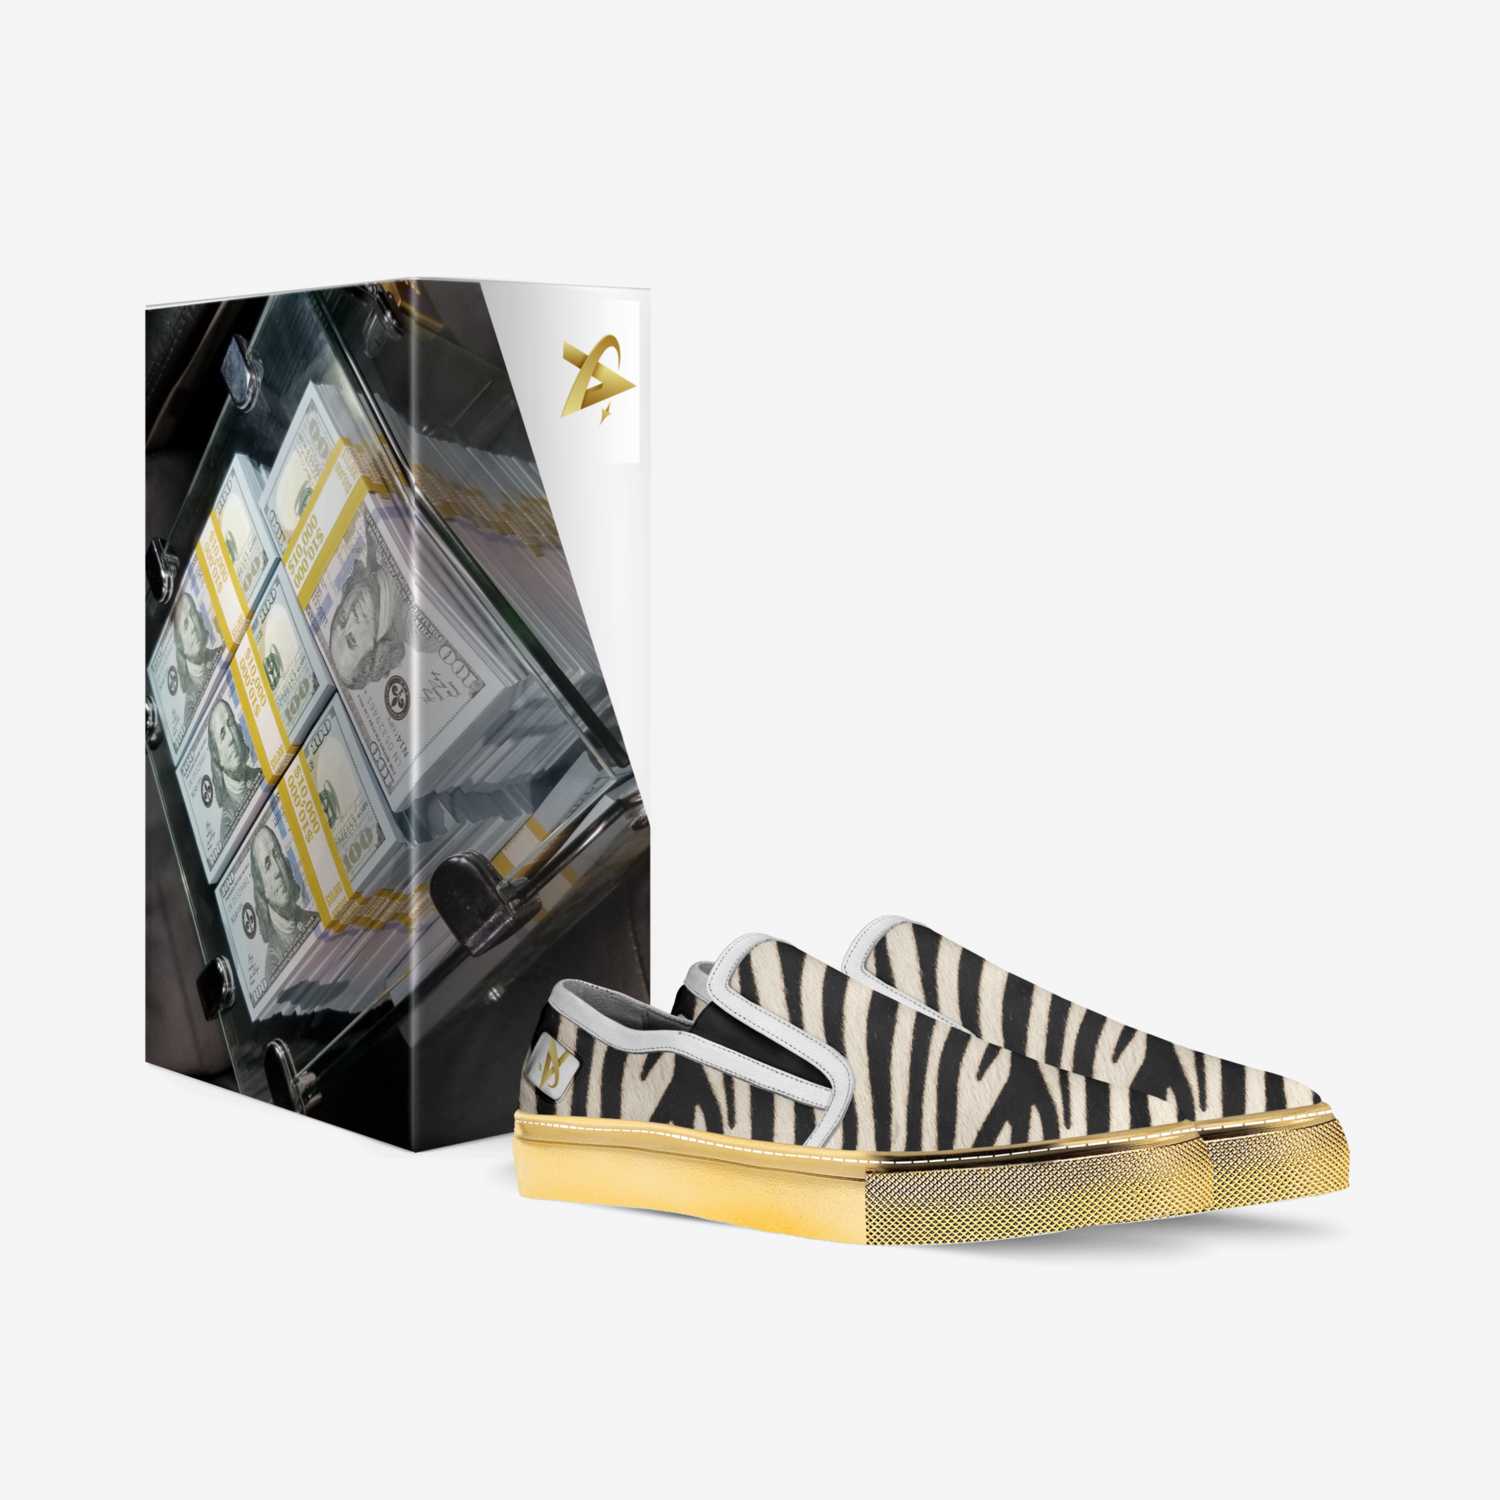 VIPDRIP21 custom made in Italy shoes by Jay Prince'Avelli | Box view